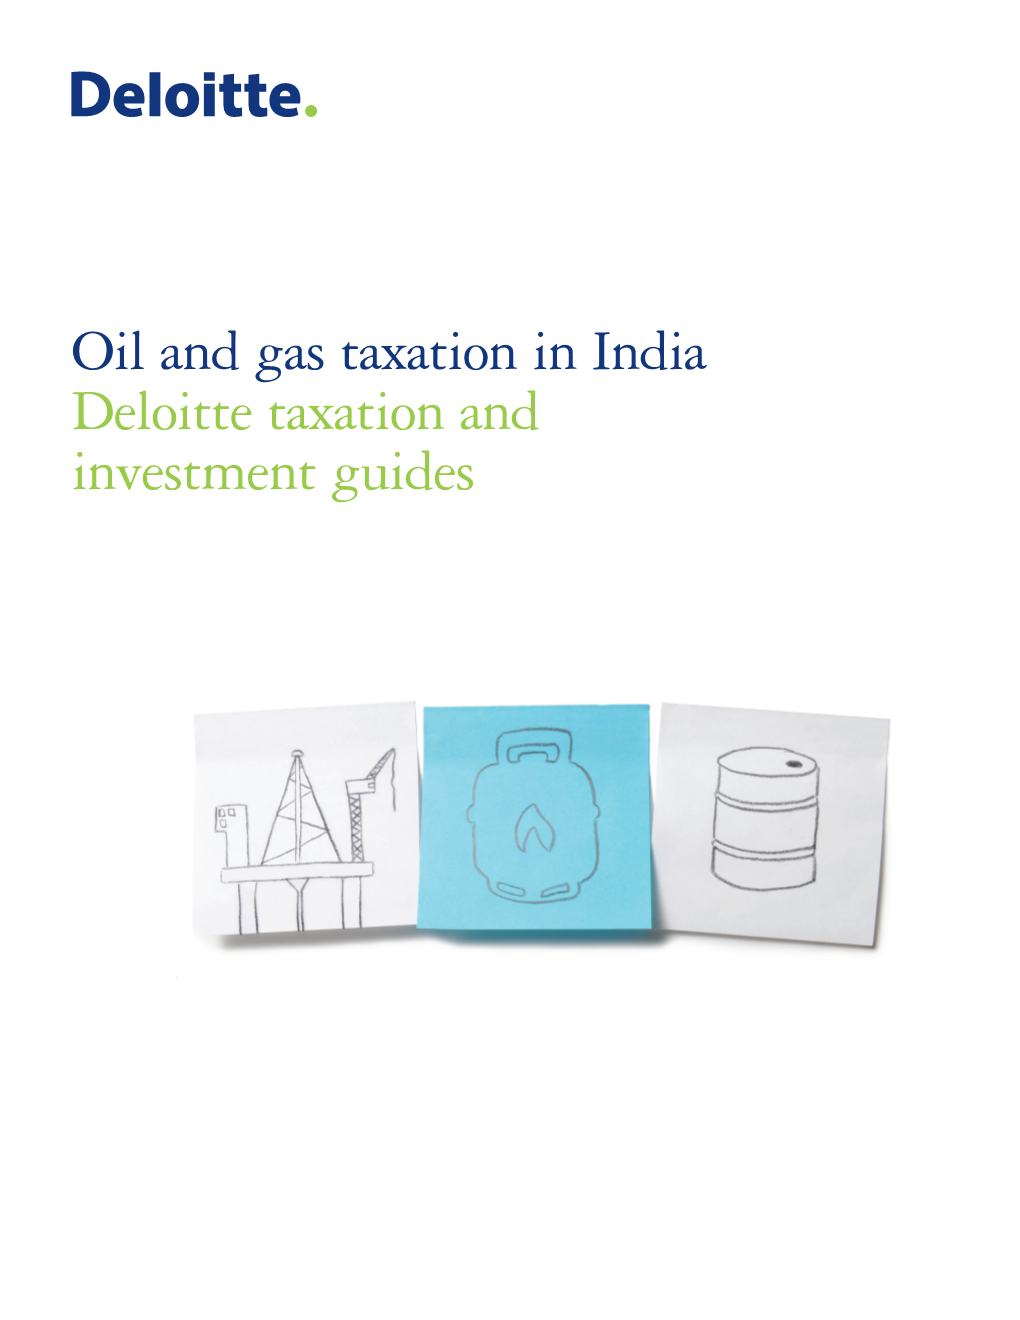 Oil and Gas Taxation in India Deloitte Taxation and Investment Guides Contents